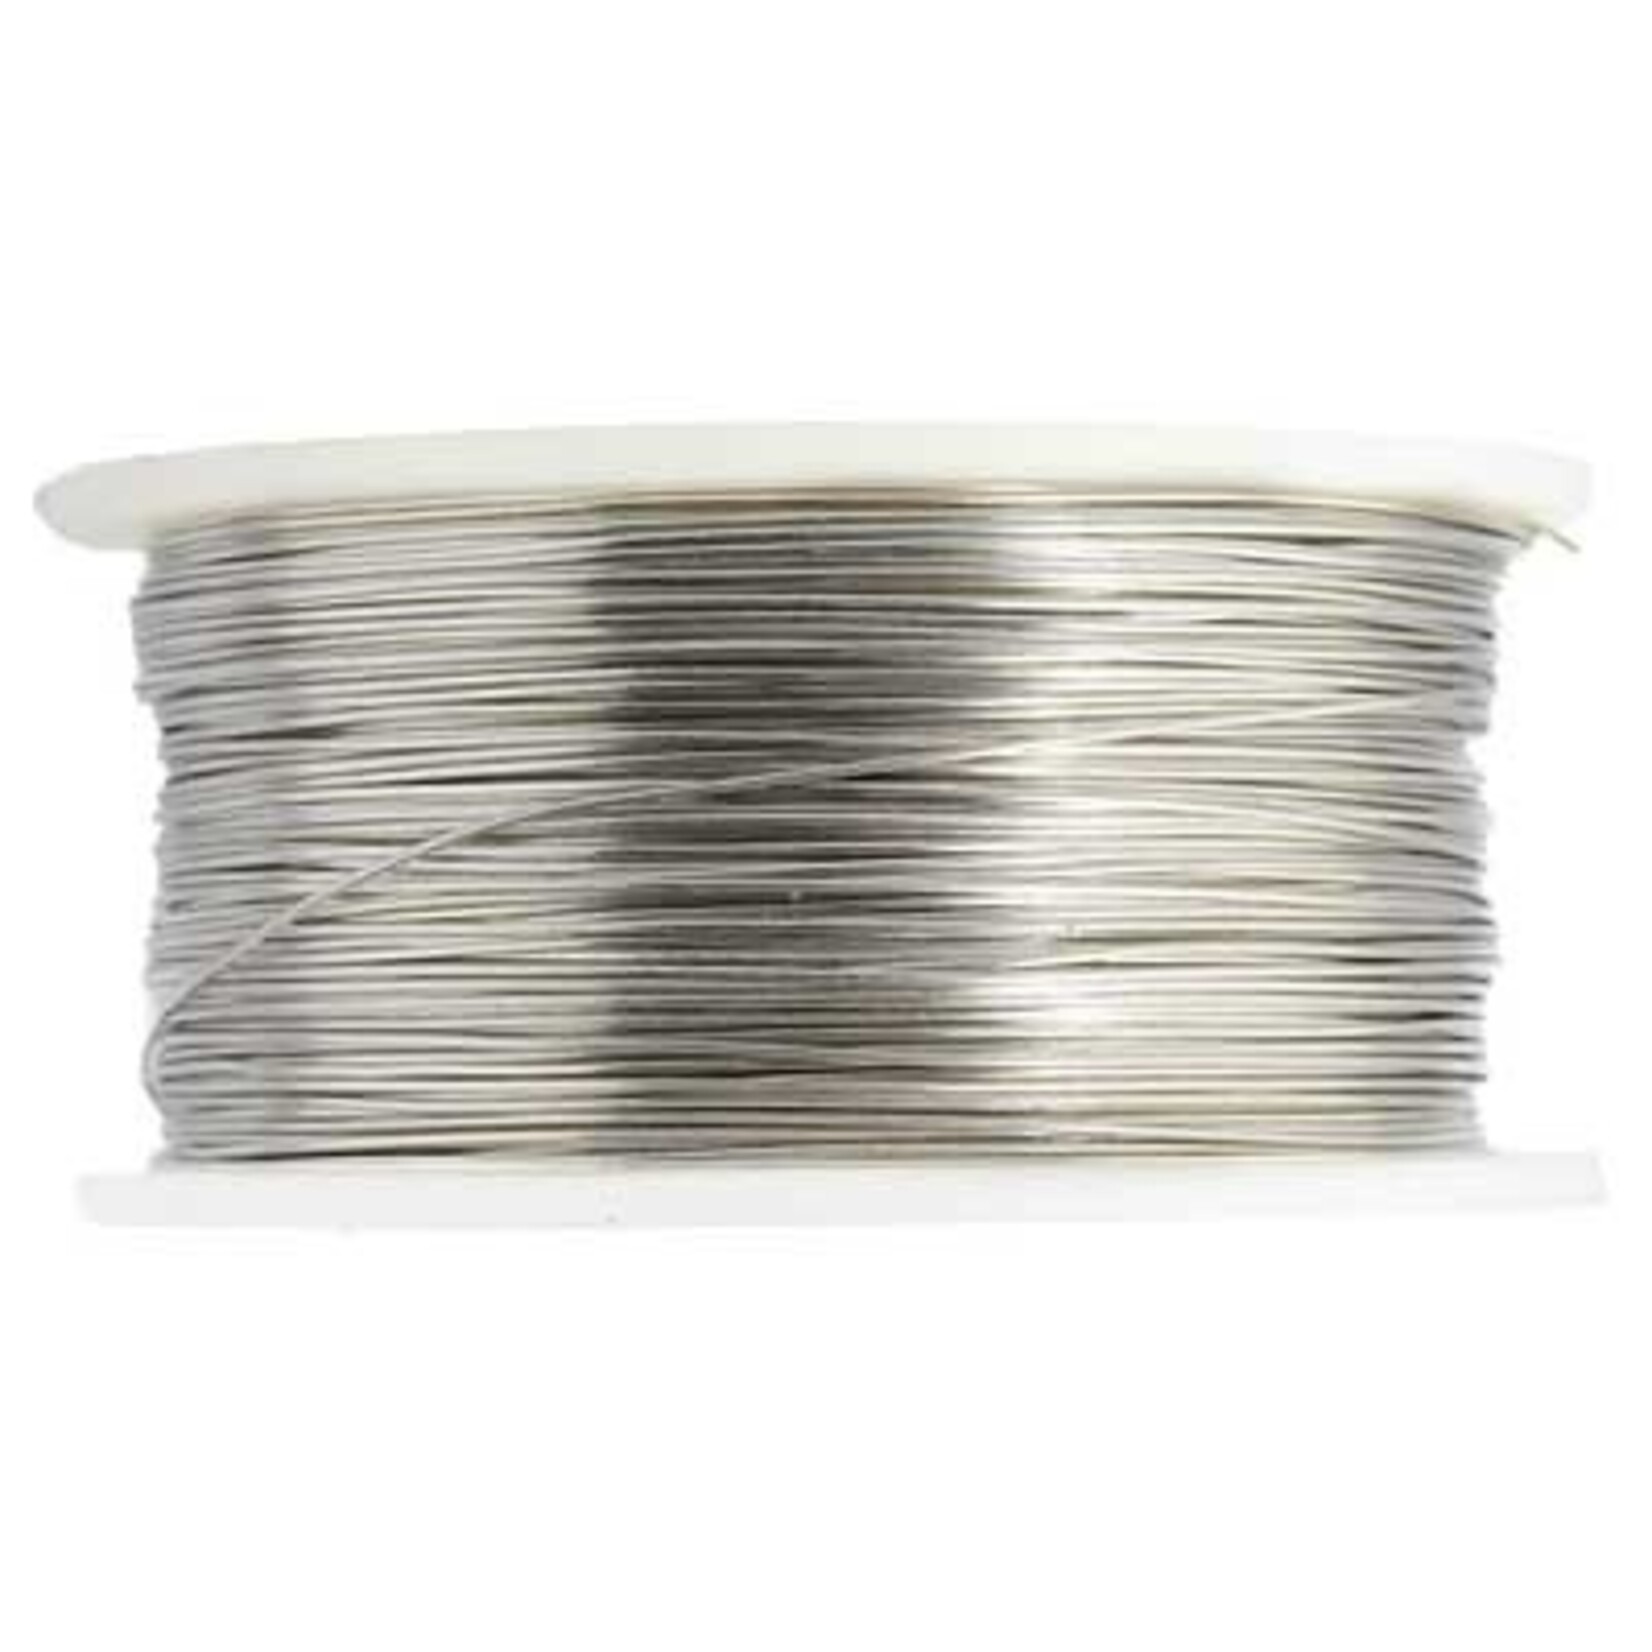 ART WIRE 28G TINNED COPPER - SILVER PLATED